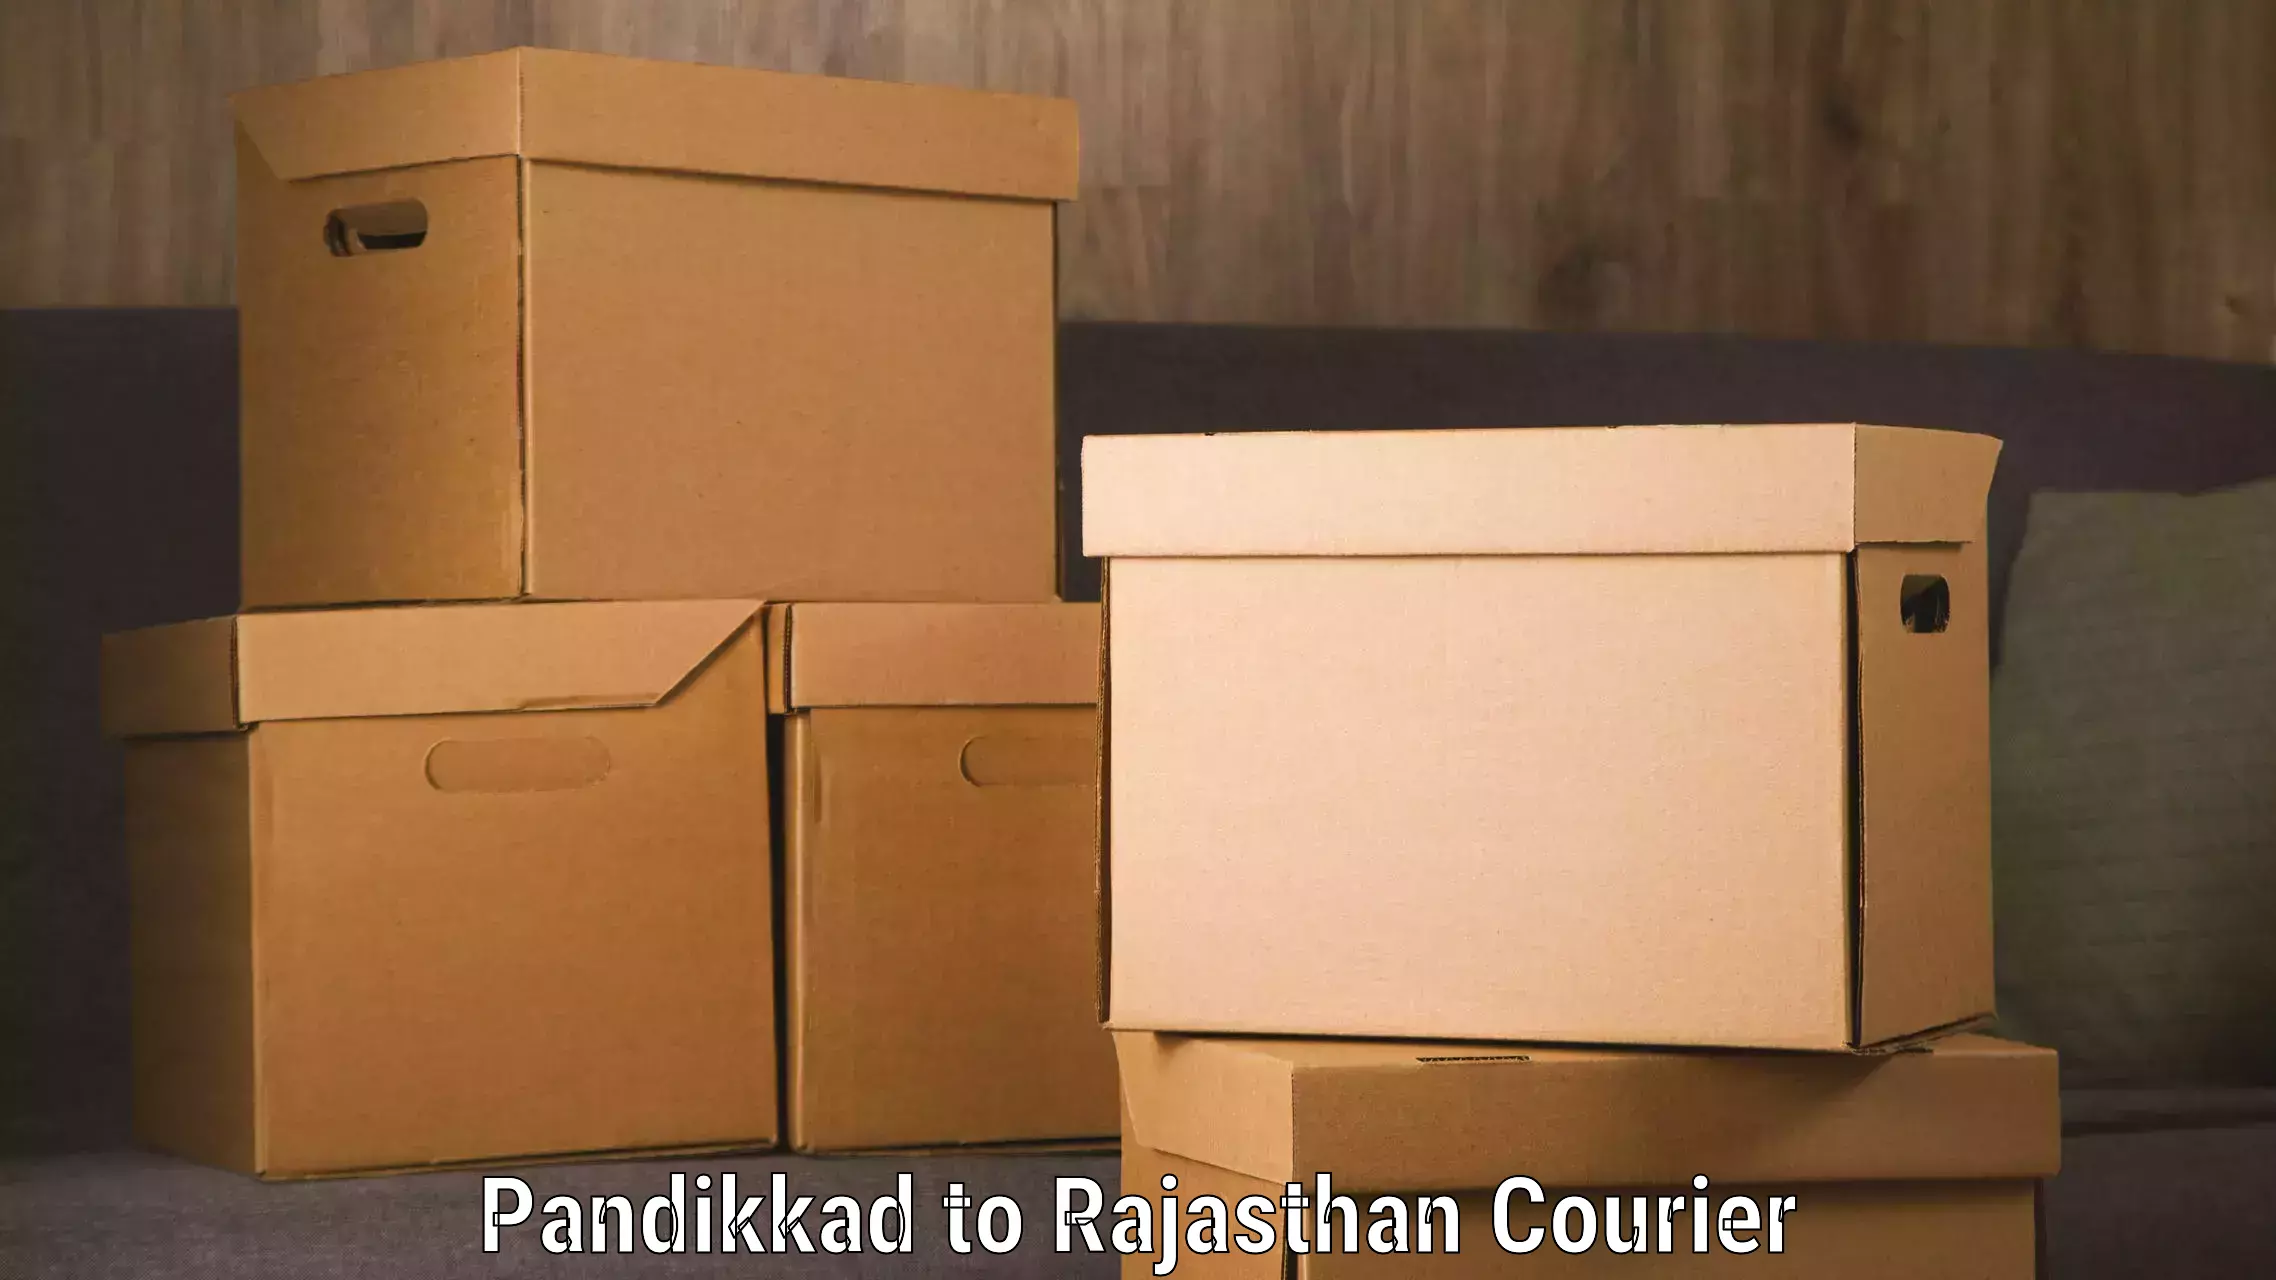 Expedited parcel delivery Pandikkad to Nagar